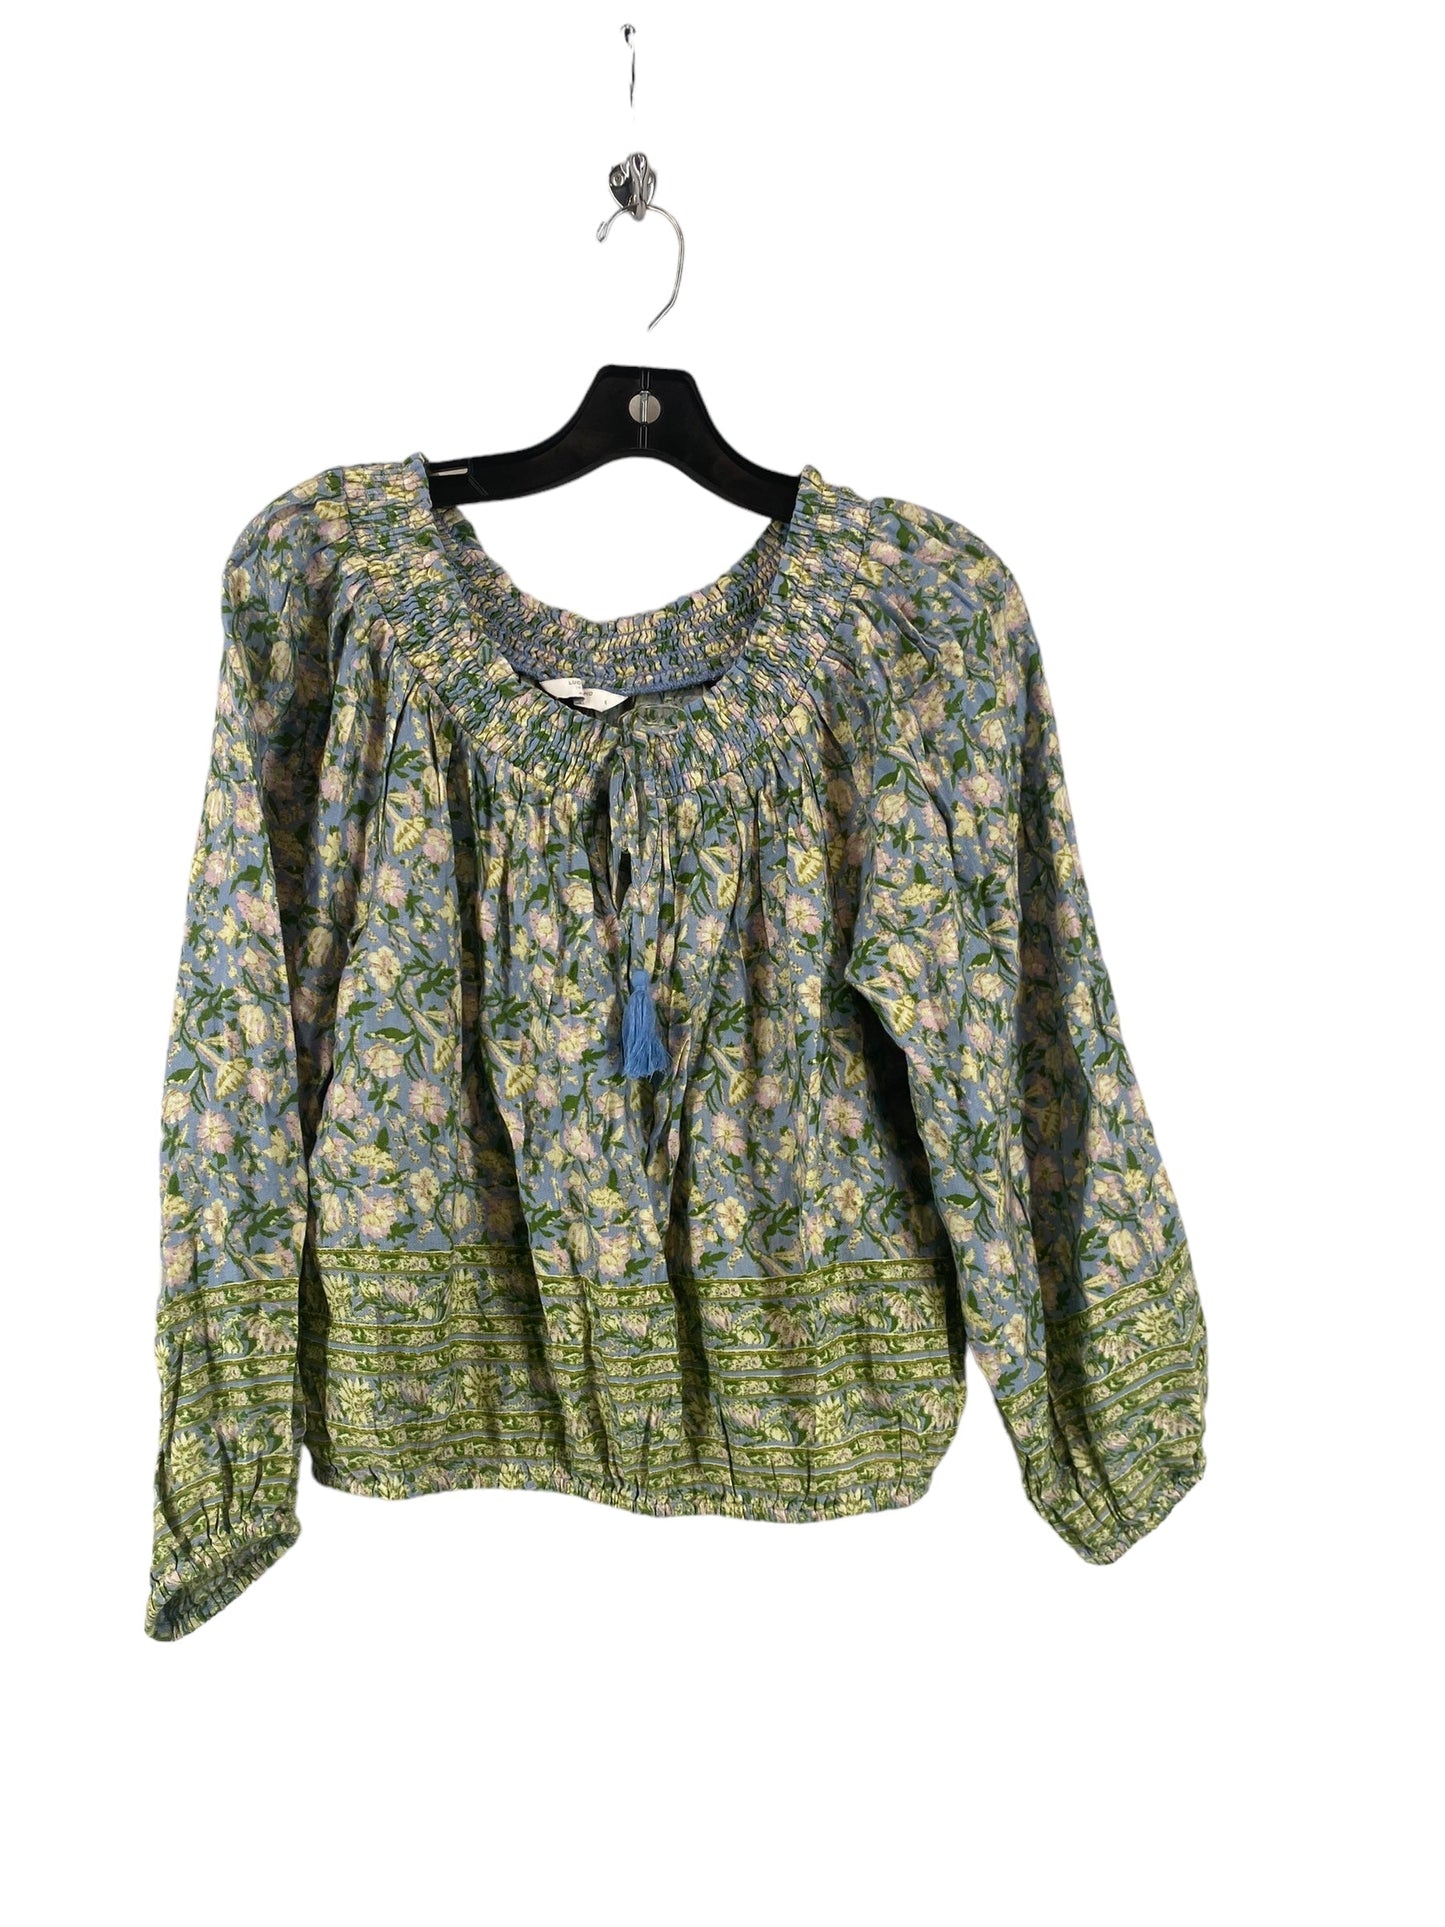 Floral Print Top 3/4 Sleeve Lucky Brand, Size S